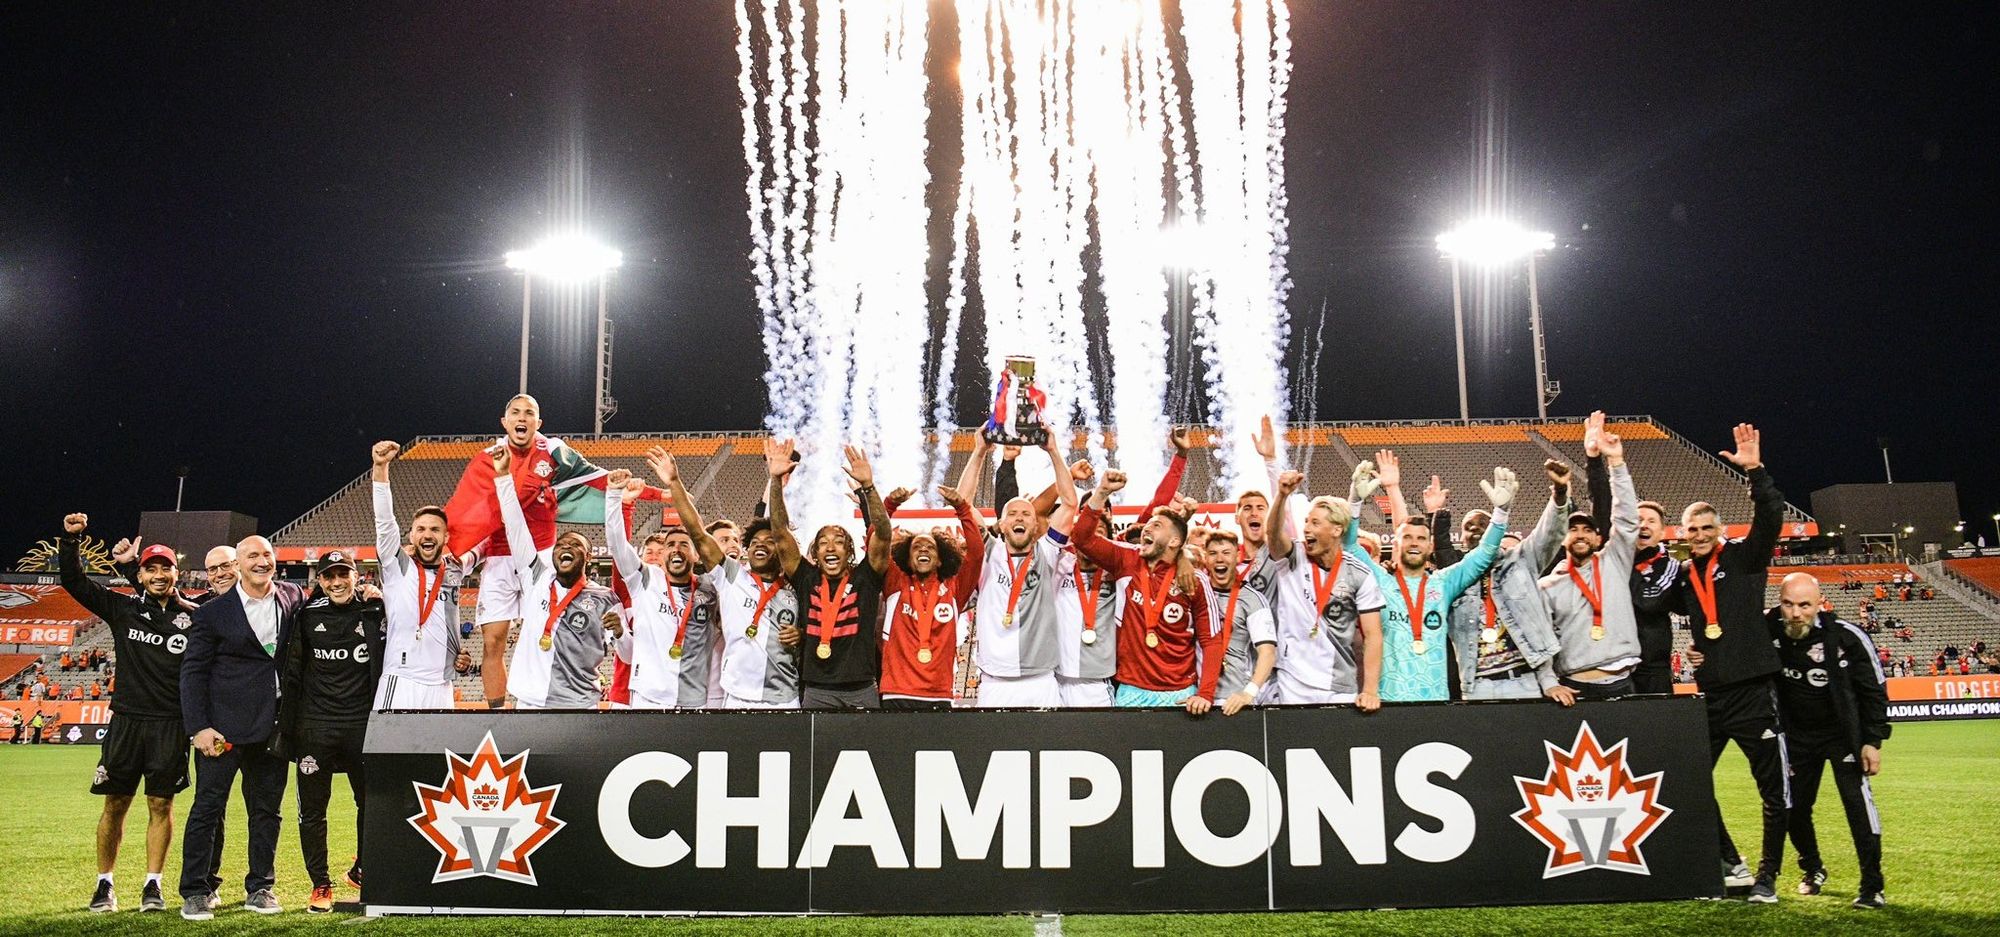 Toronto FC beats Forge FC, crowned 2020 Canadian champions